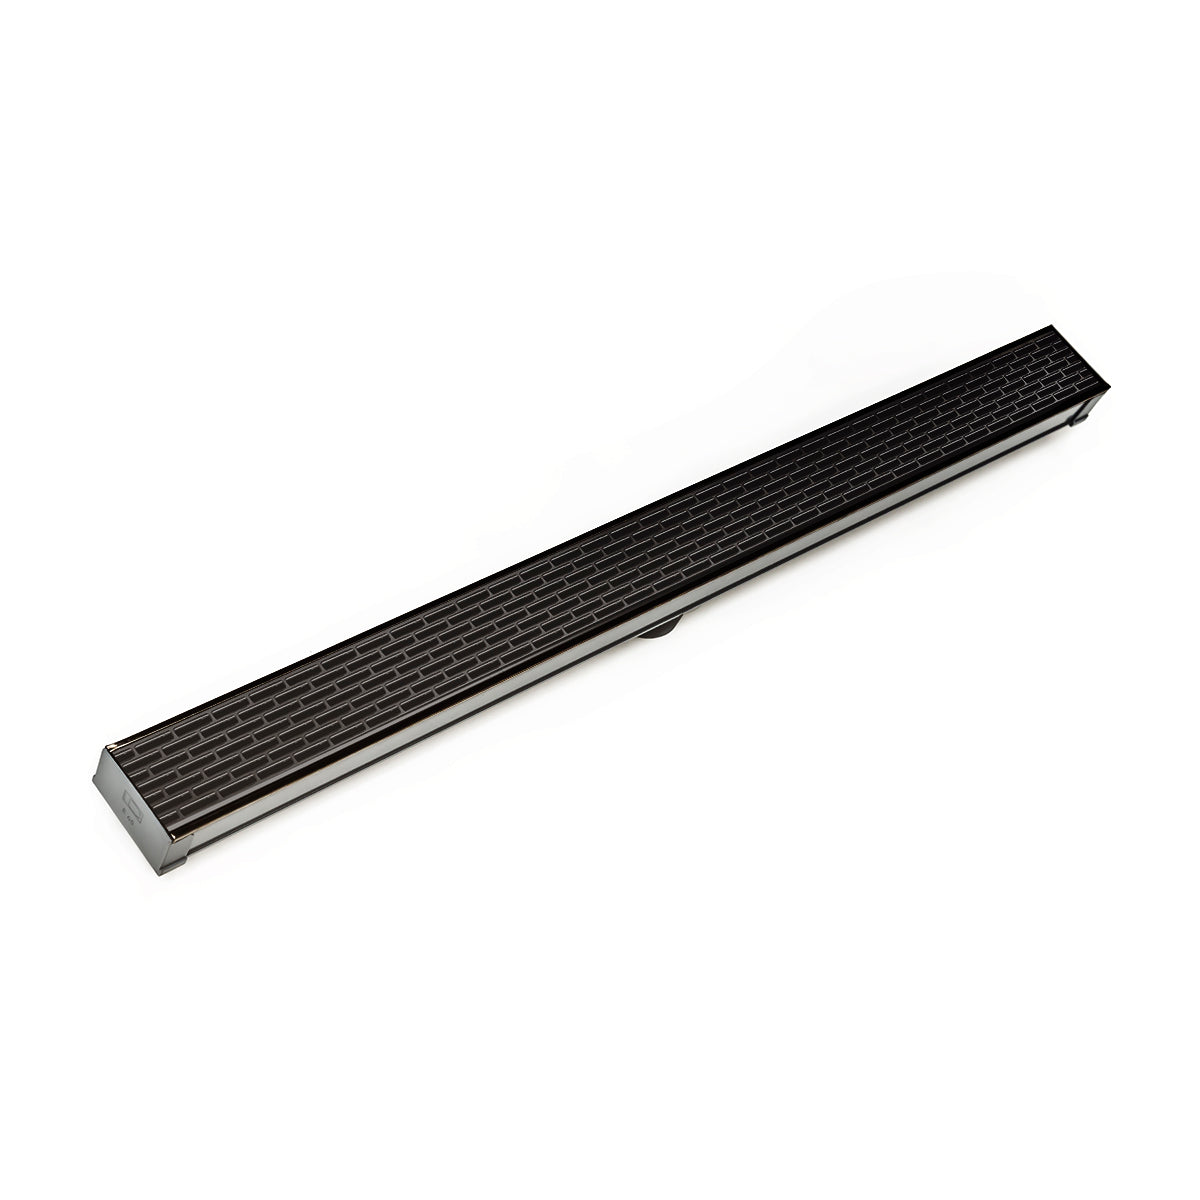 Infinity Drain 96" S-PVC Series Low Profile Site Sizable Linear Drain Kit with 2 1/2" Perforated Offset Slot Grate